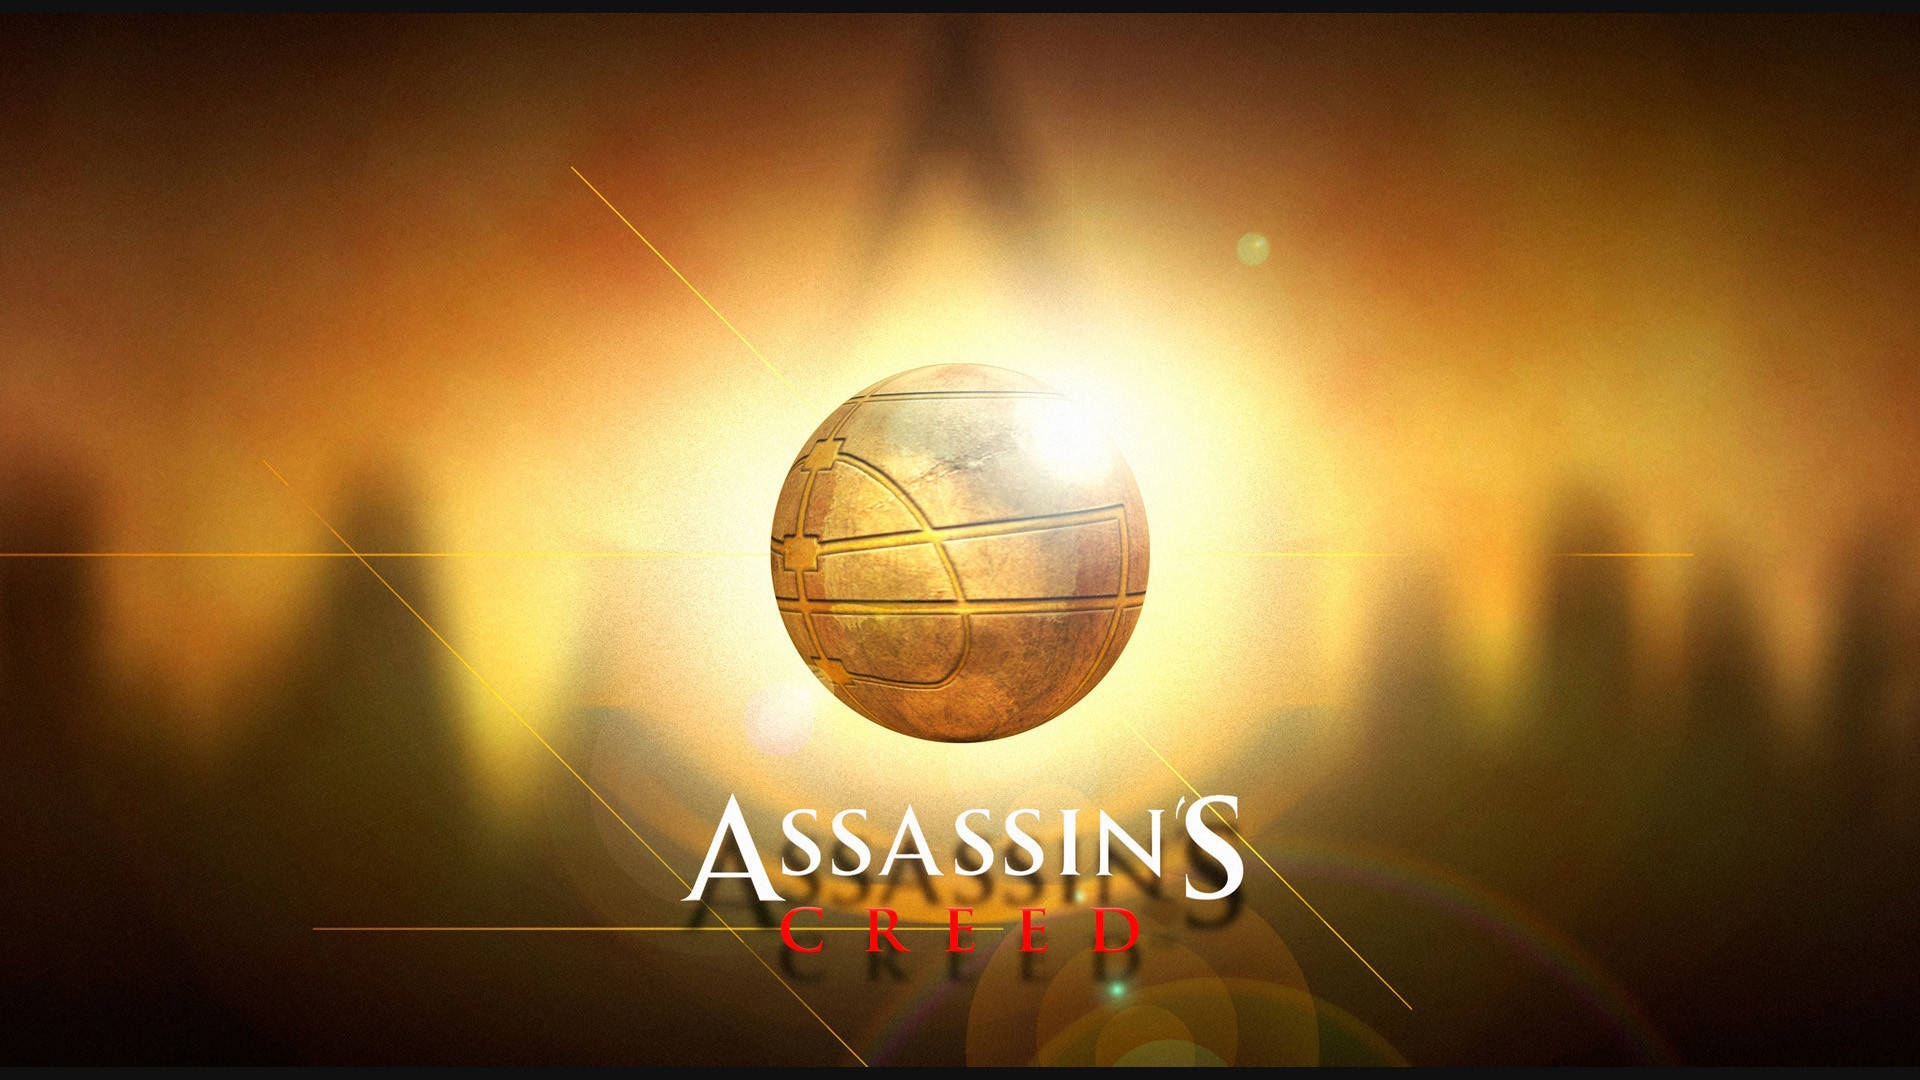 Assassin's Creed Wallpaper Images